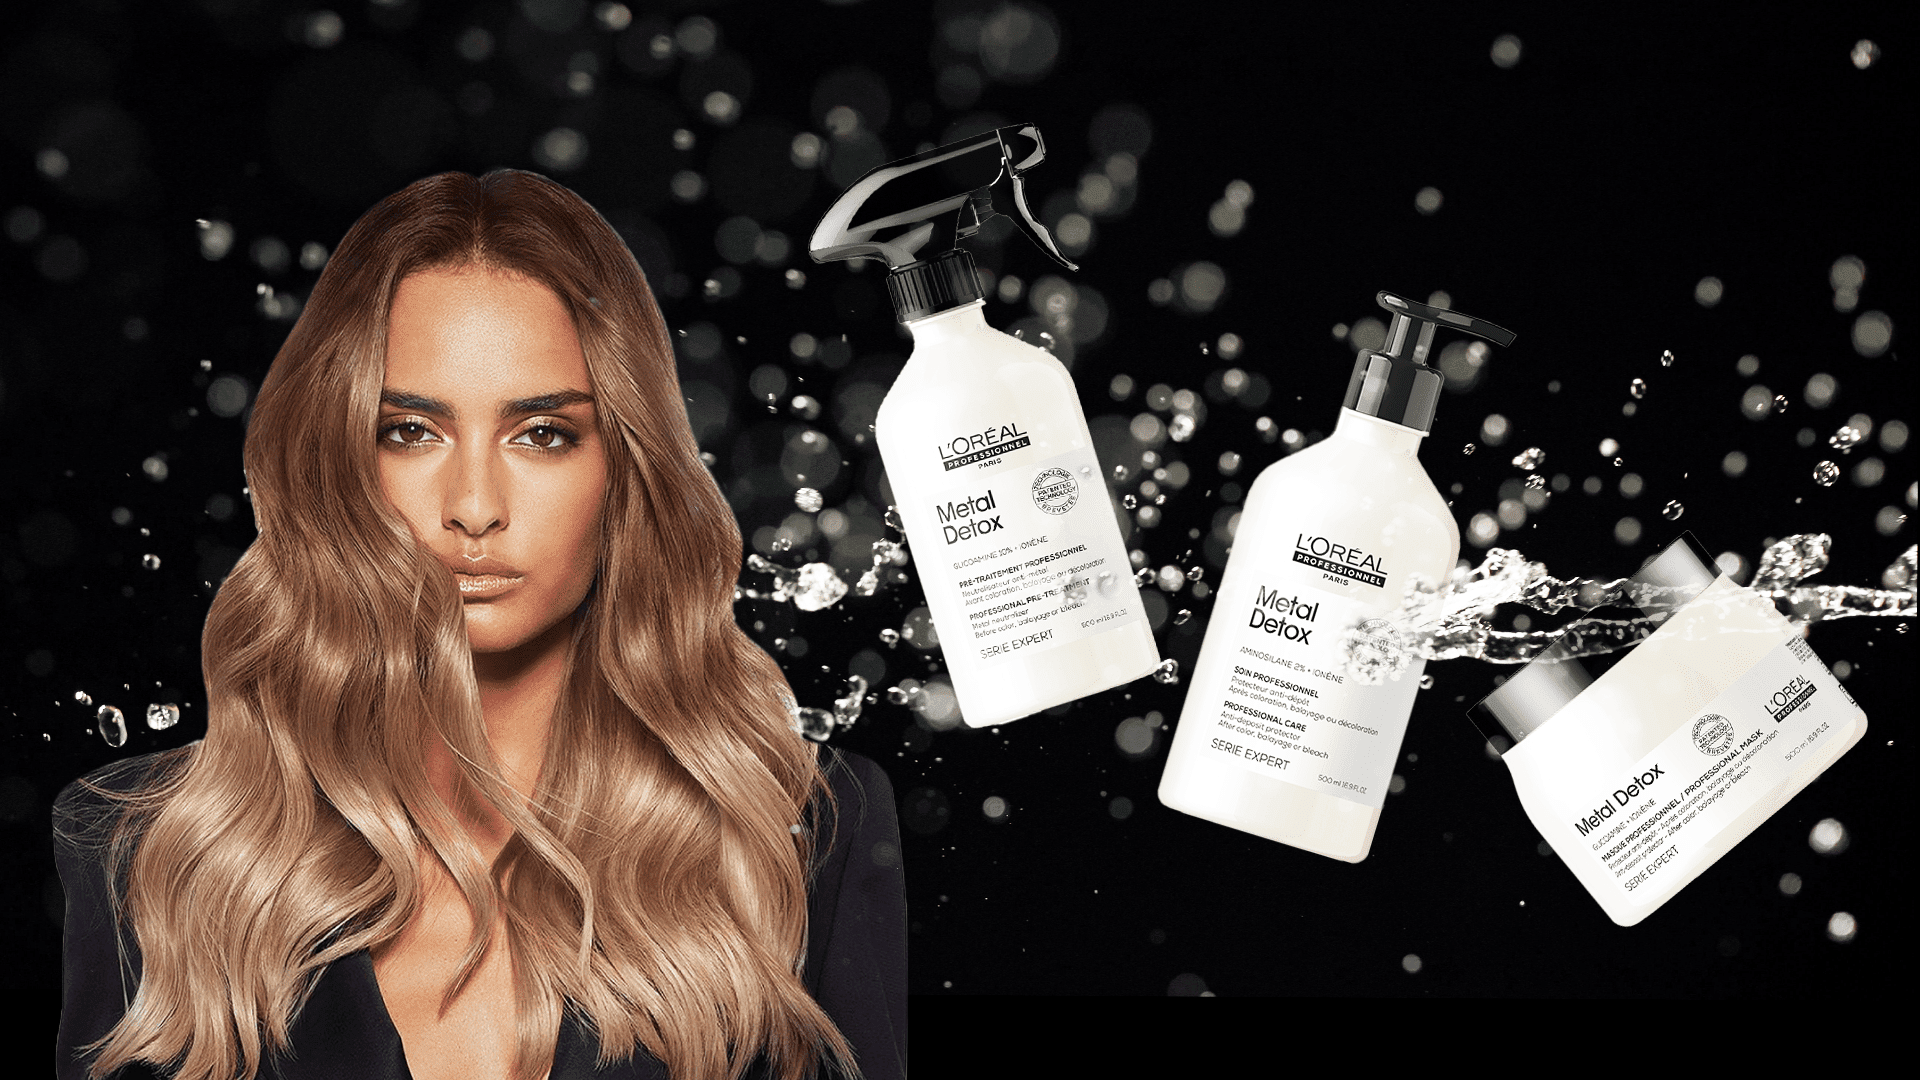 Hairstylist Kathy Nunez Answers 9 Questions about L'Oreal's Metal Detox -  The Tease